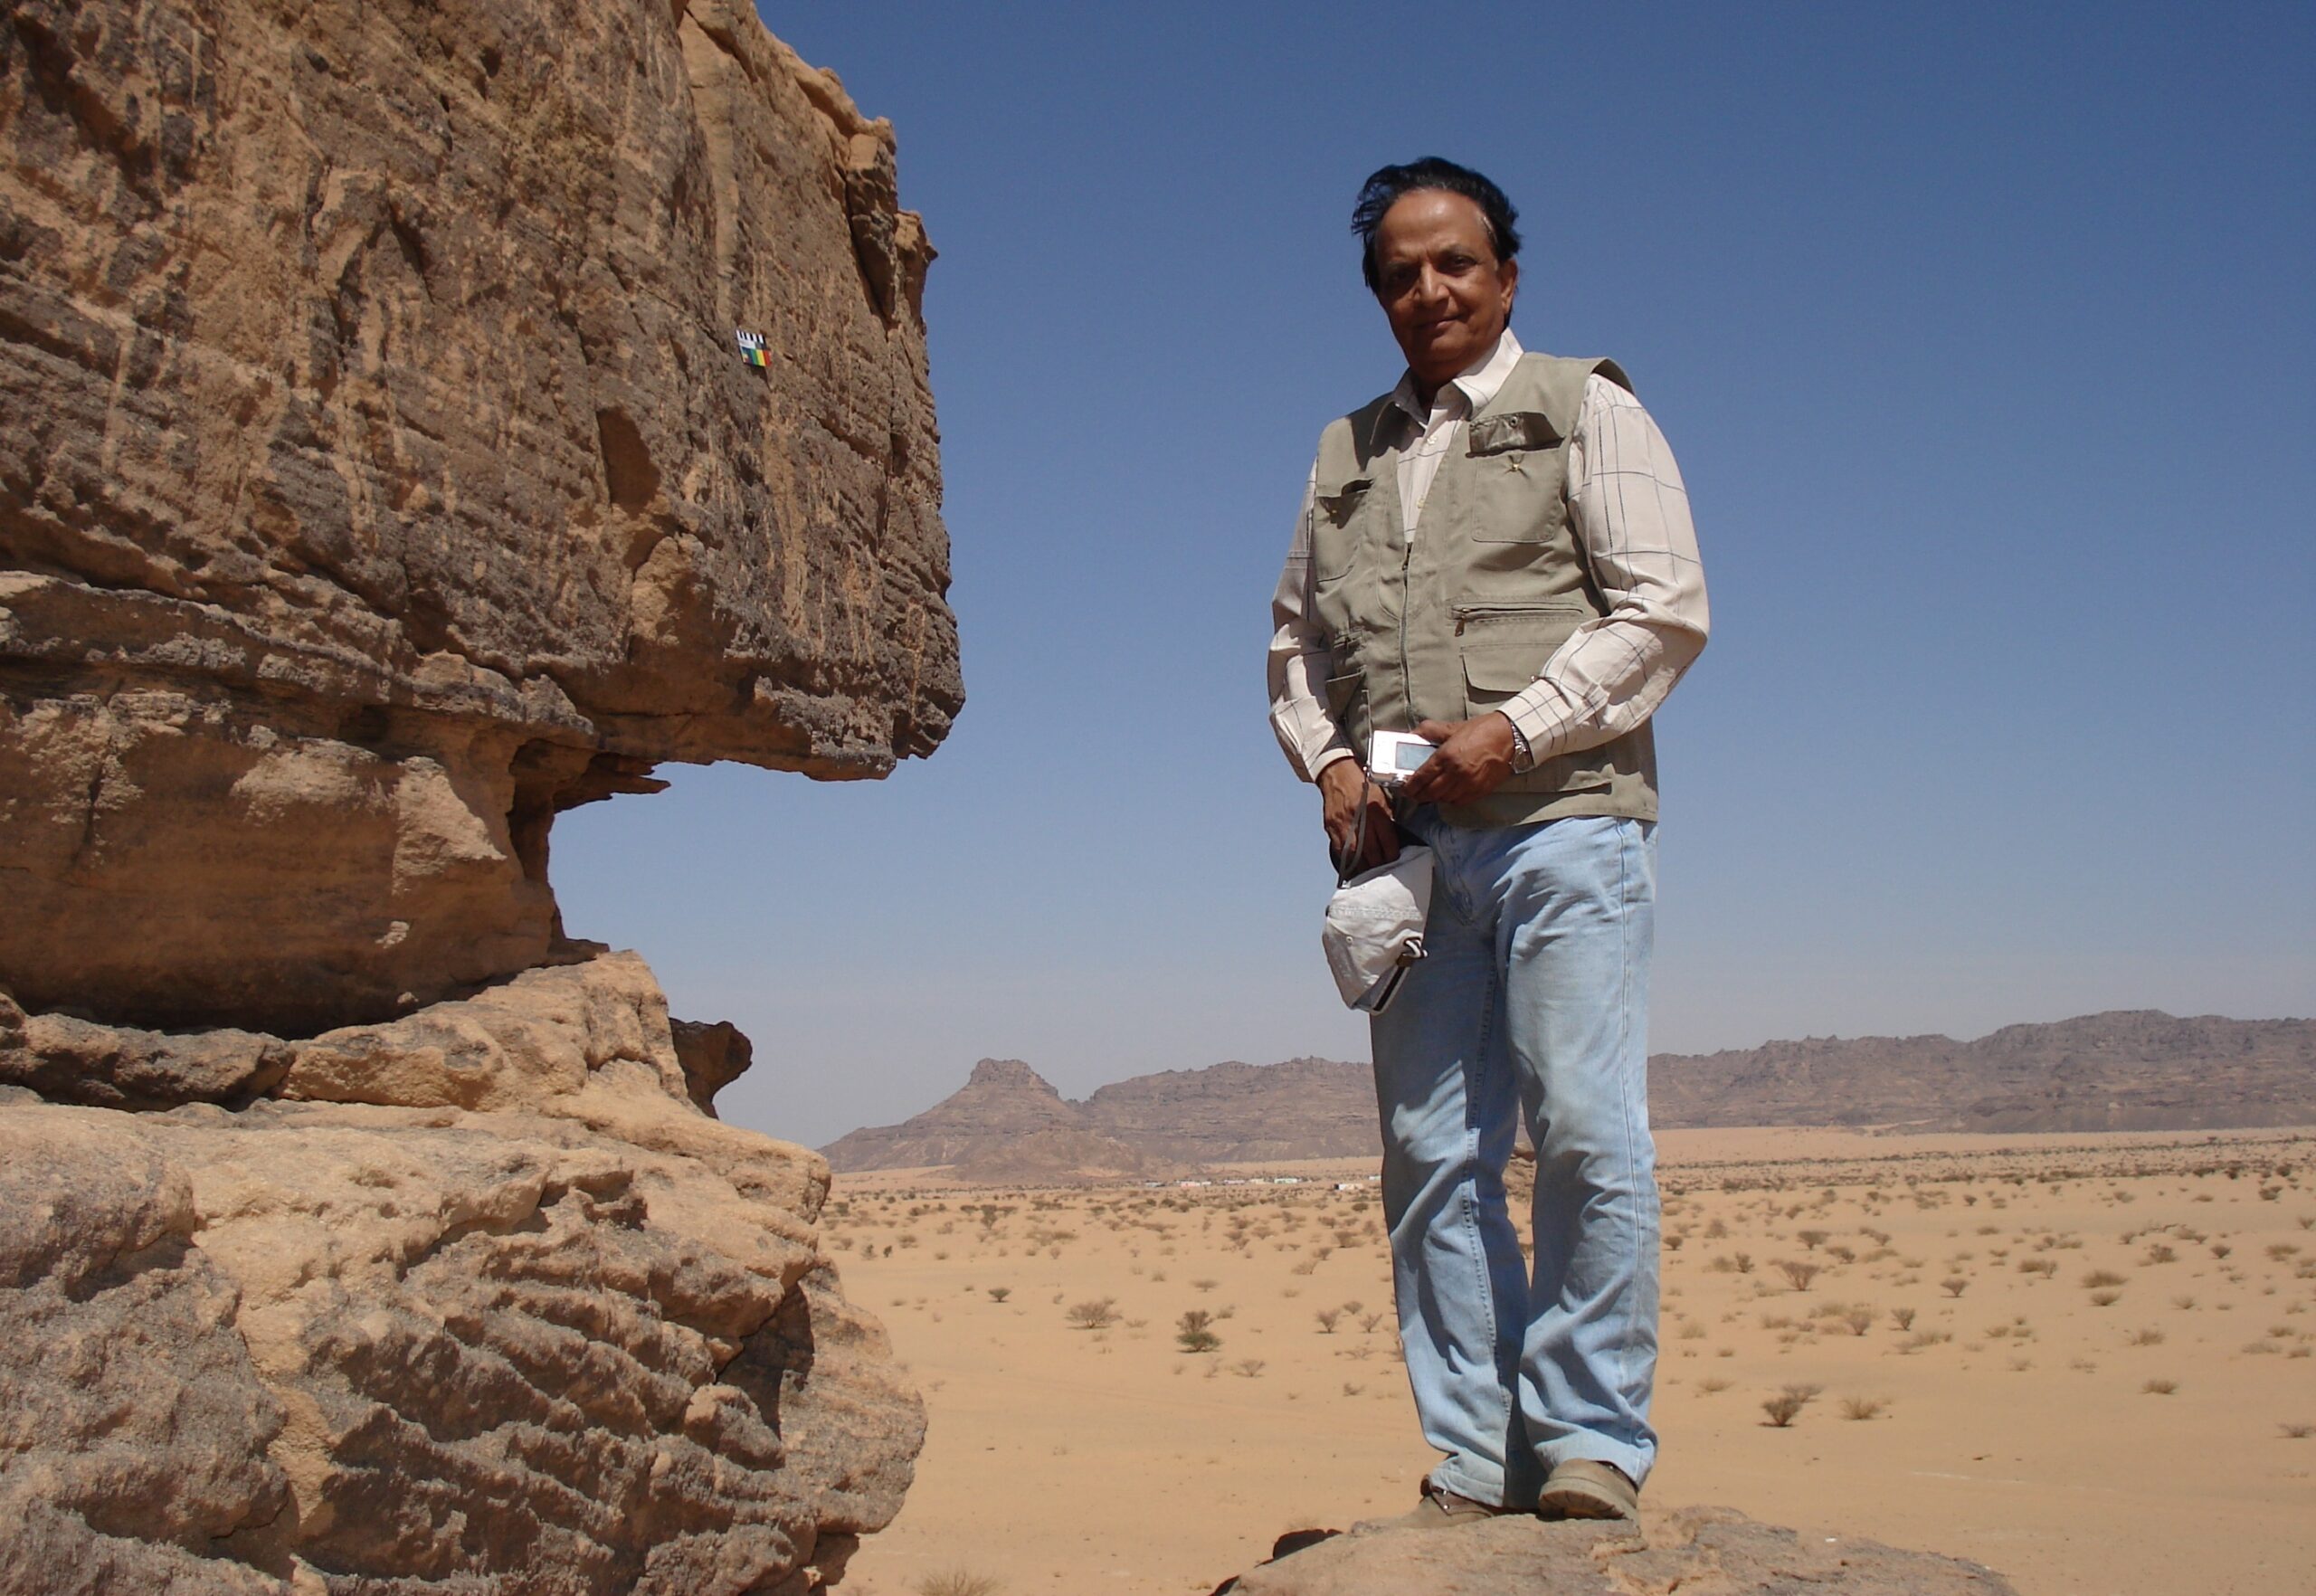 Dr Majeed Khan has been researching Saudi rock art for more than 30 years